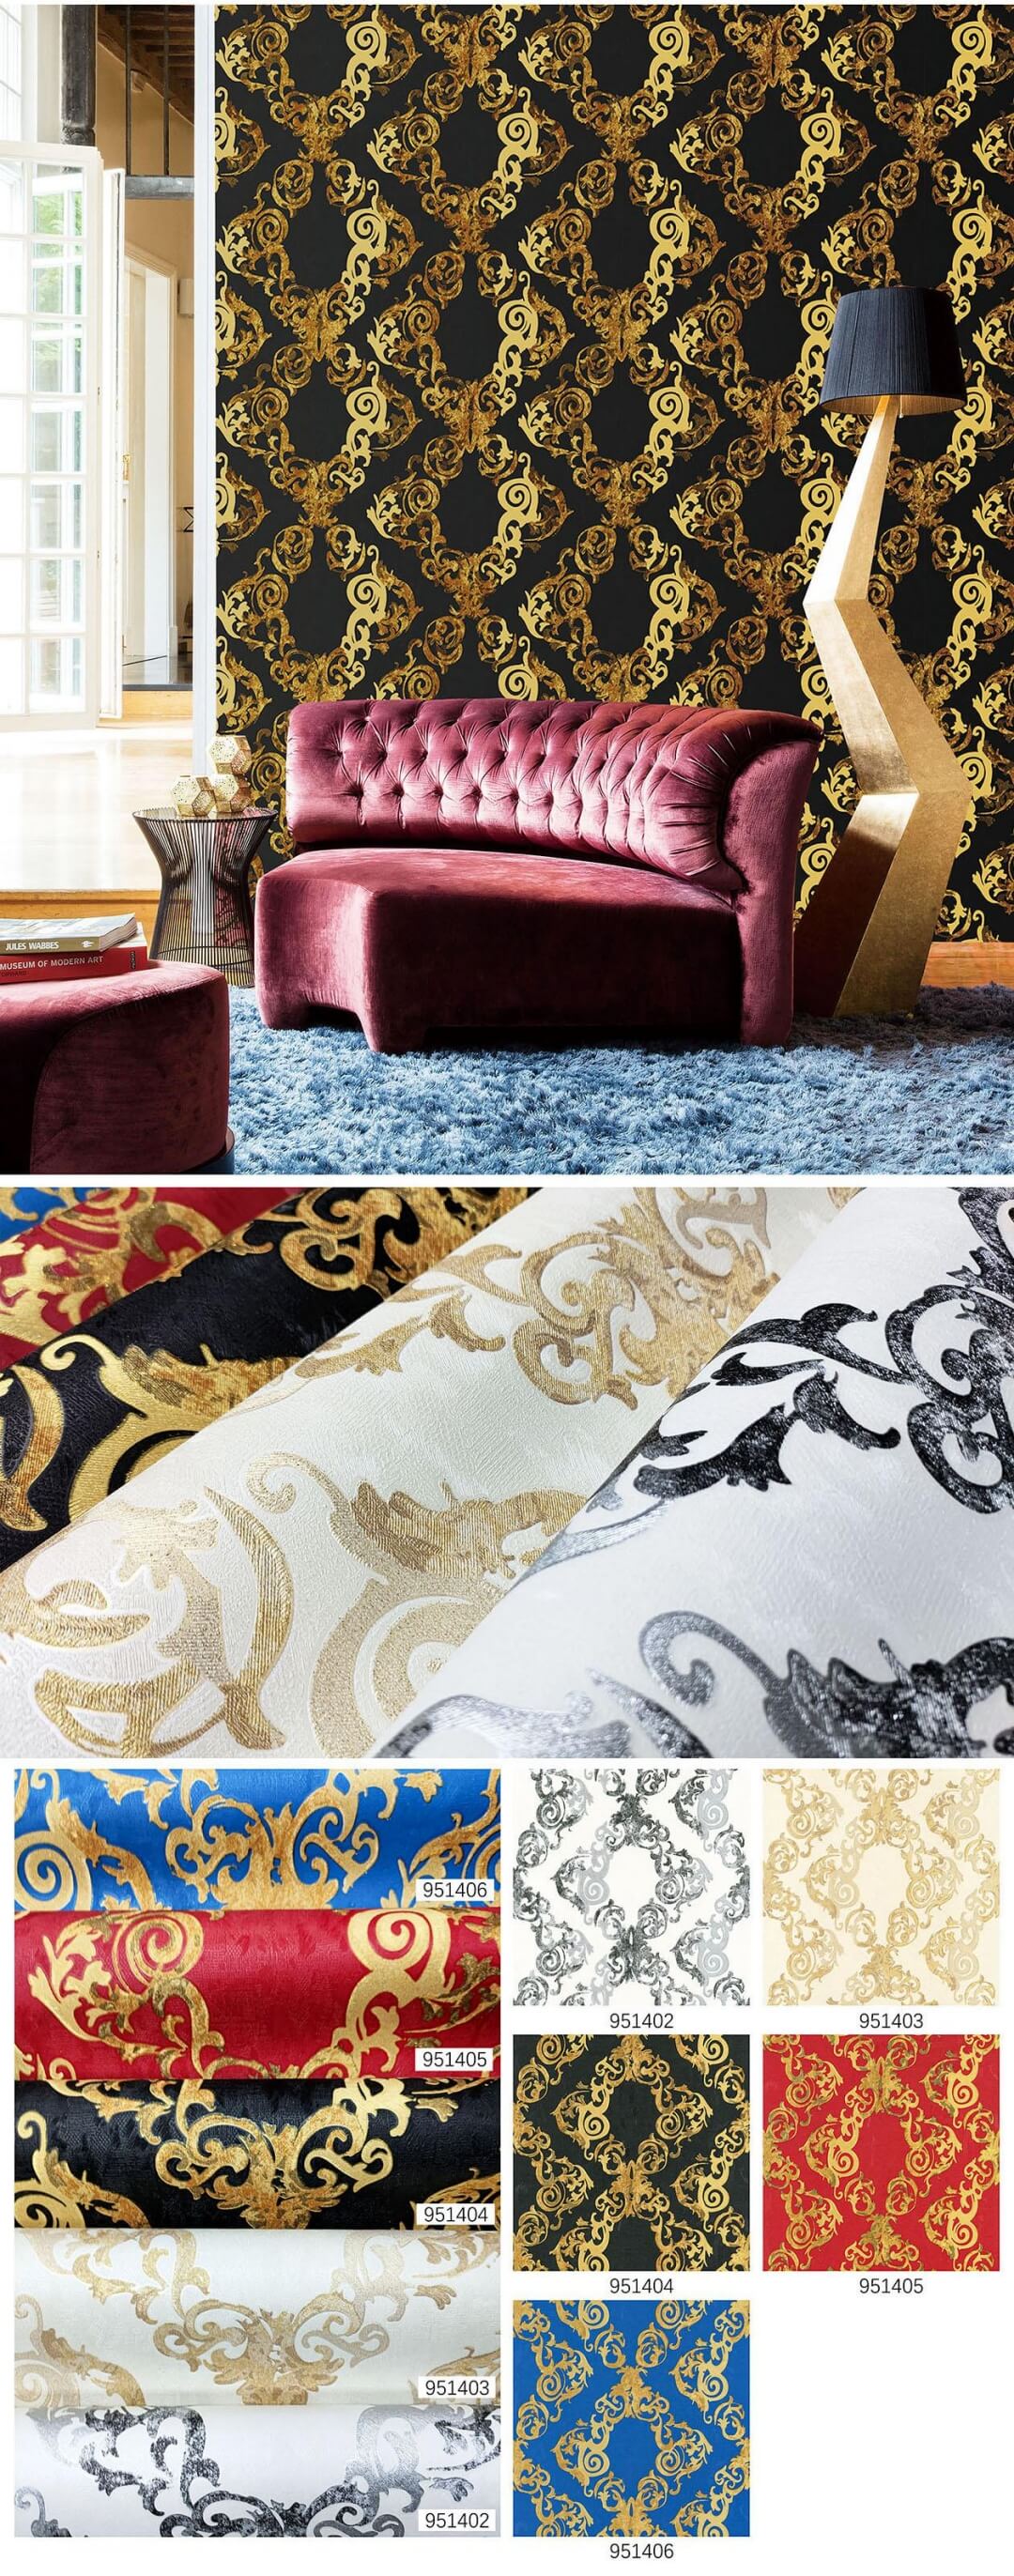 3D Wallpaper for home decoration (1)